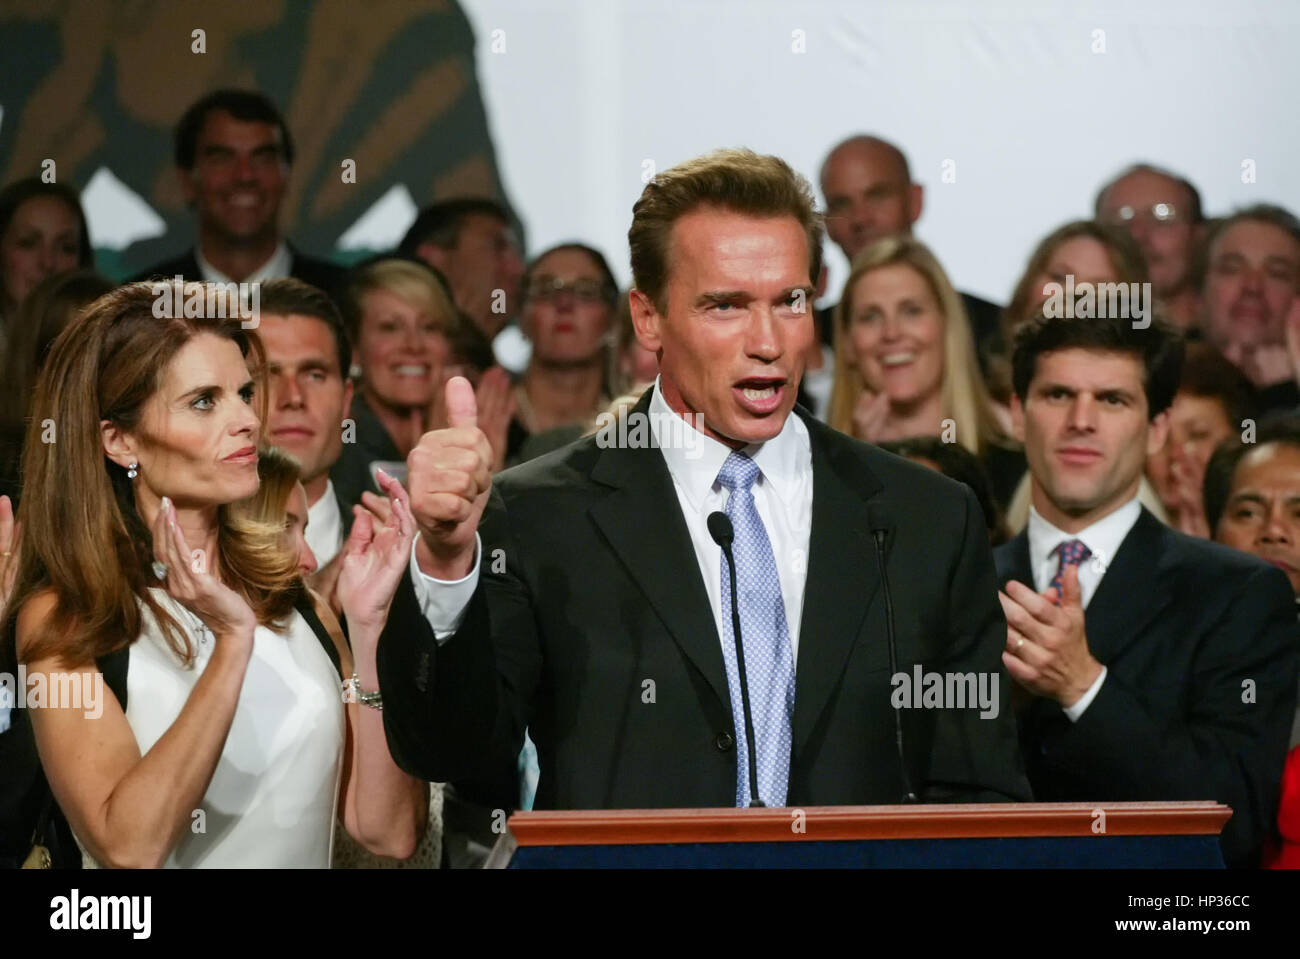 Arnold Schwarzenegger (R) and wife Maria Shriver speak at the podium during his victory party in the gubernatorial recall election in a Los Angeles hotel, 07 October 2003. Actor-turned-politician Arnold Schwarzenegger won handily over his nearest Democratic opponent, Lt. Gov. Cruz Bustamante after Gov. Gray Davis lost by a wide margin in the recall vote.  Mandatory Credit - Photo by Francis Specker Stock Photo